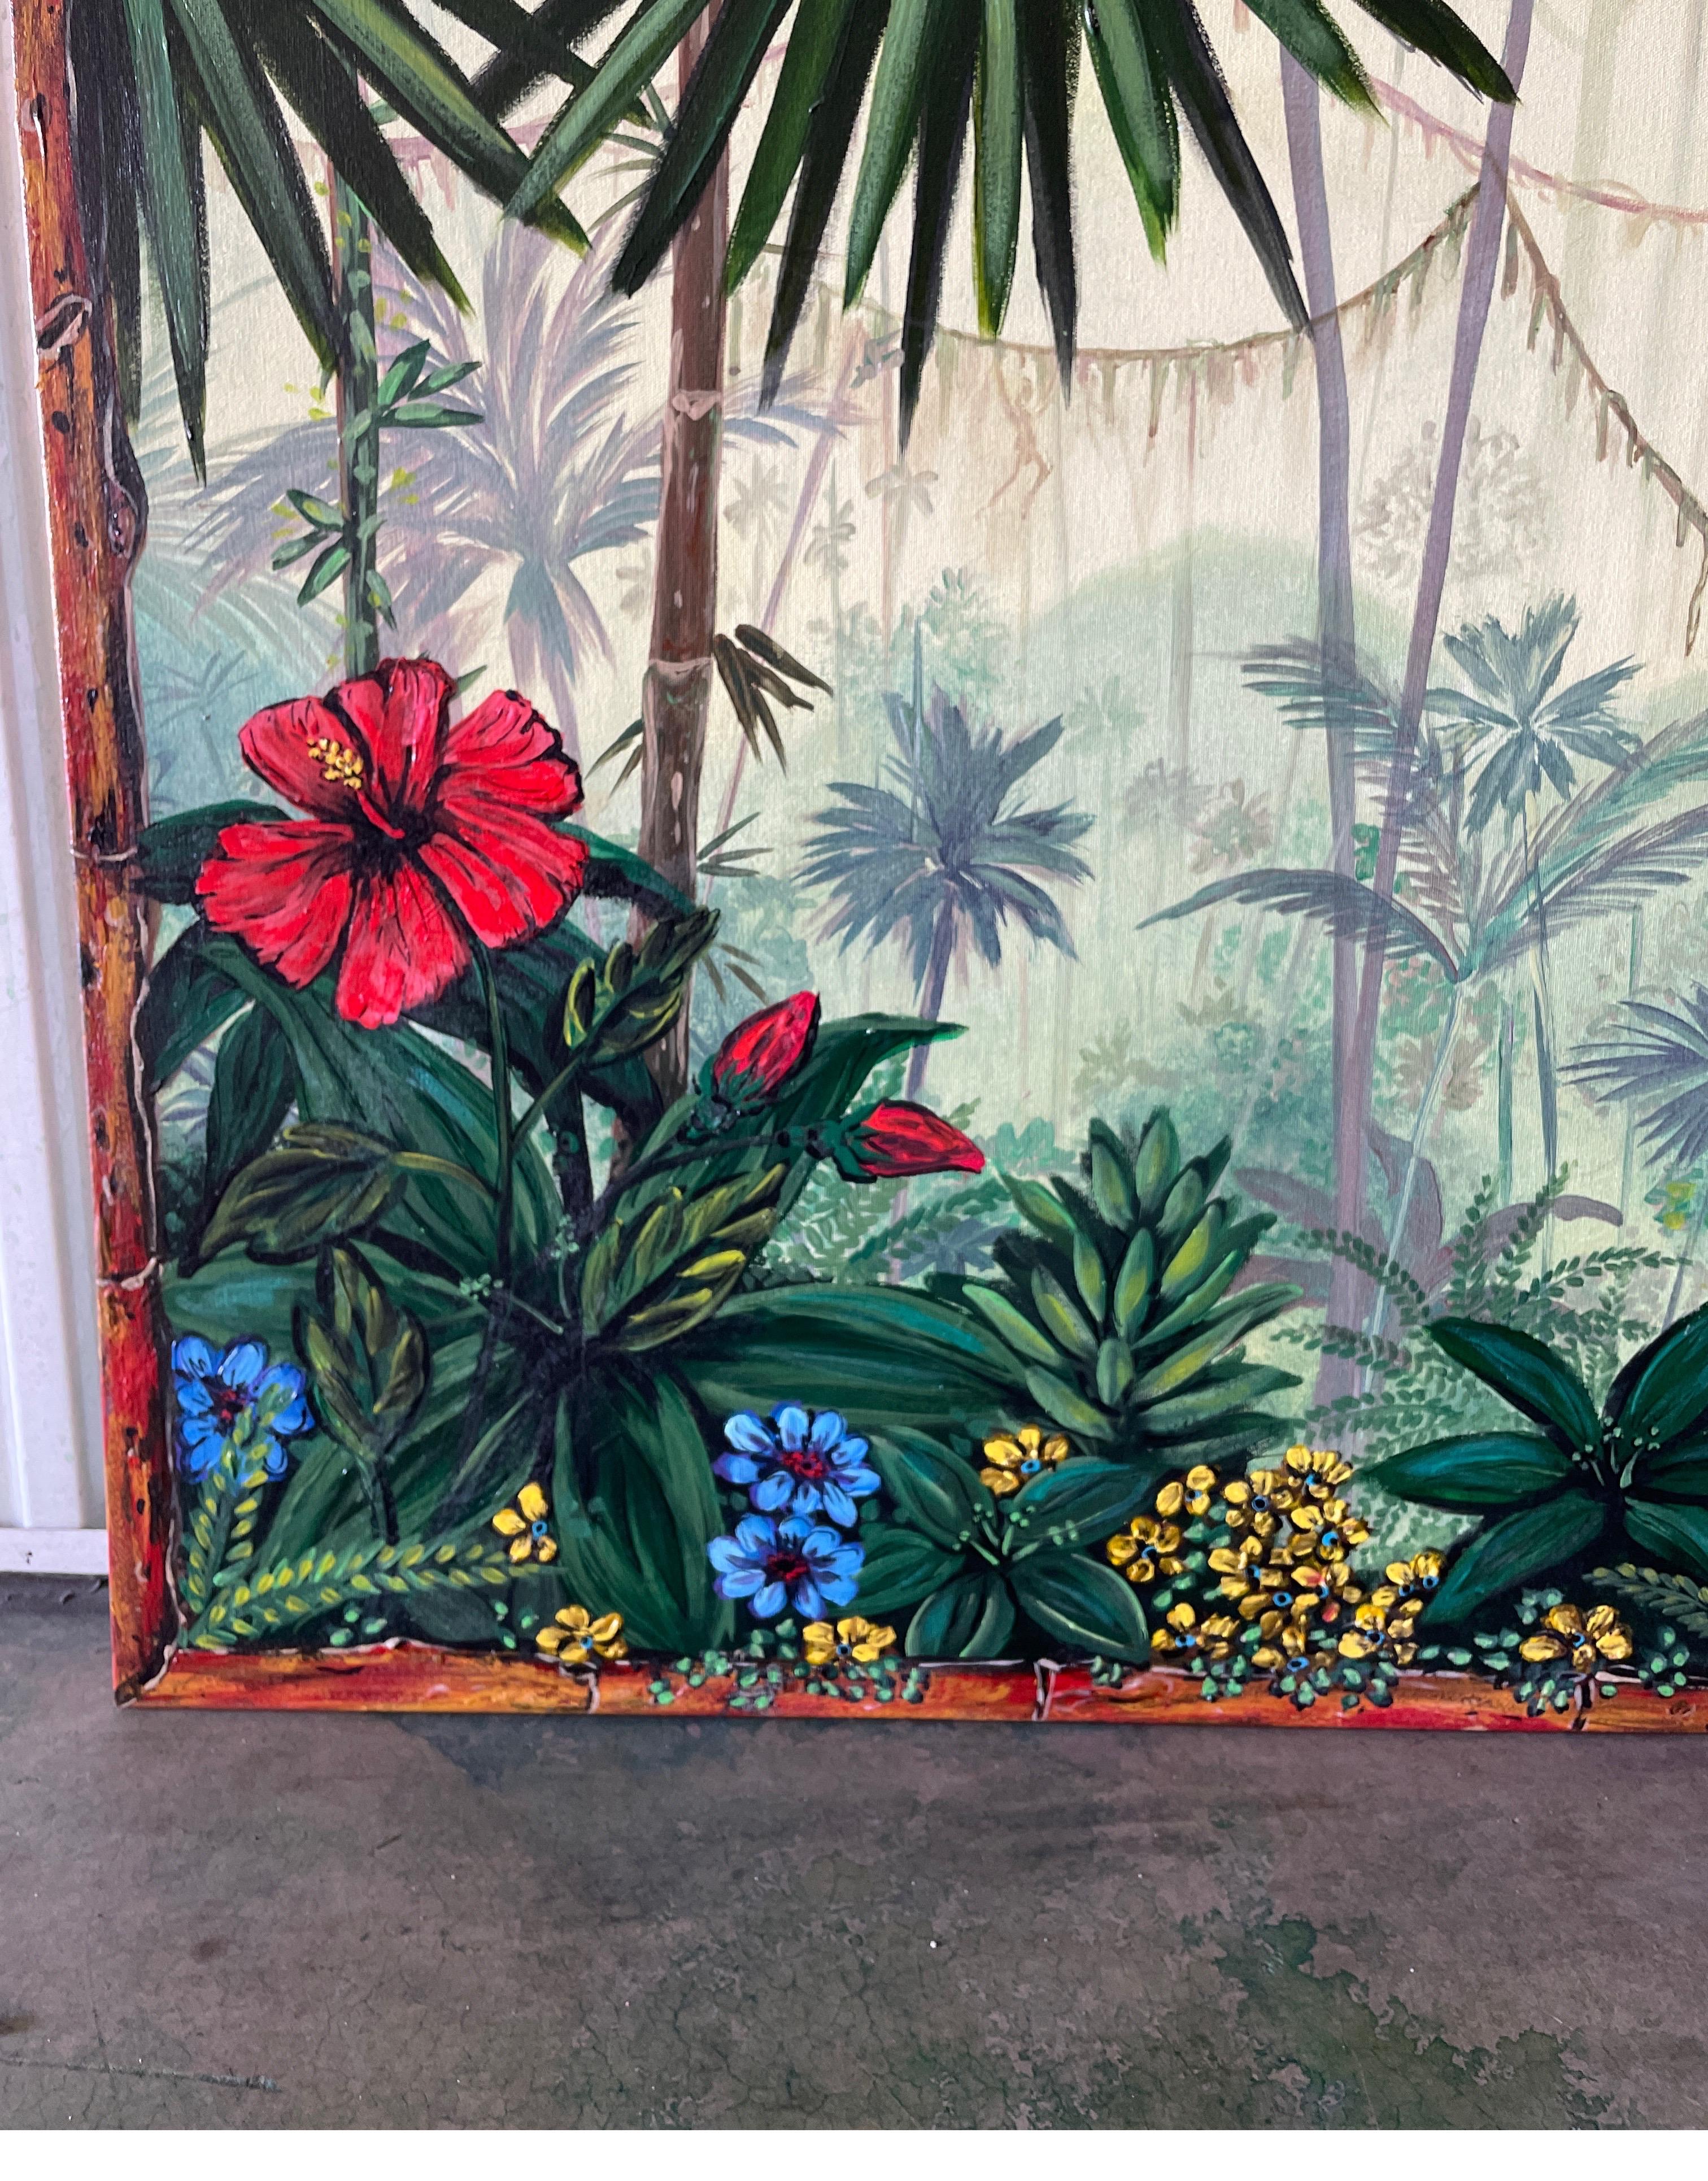 Original oil painting of Tropical Jungle setting with bright flowers & Palm trees. Faux bamboo painted frame border.